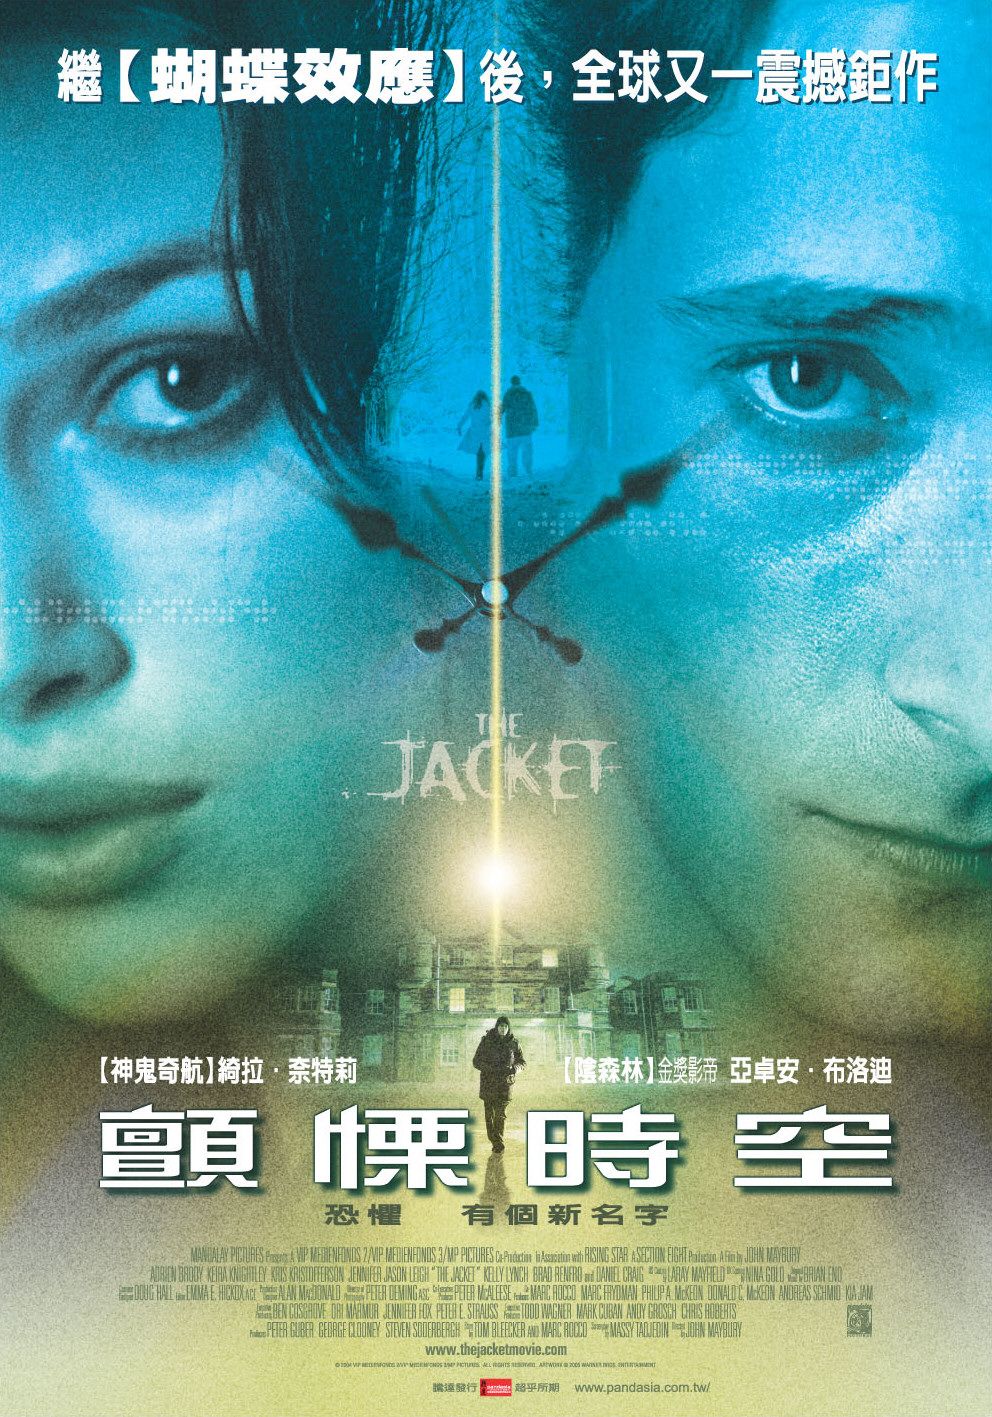 Extra Large Movie Poster Image for The Jacket (#6 of 8)